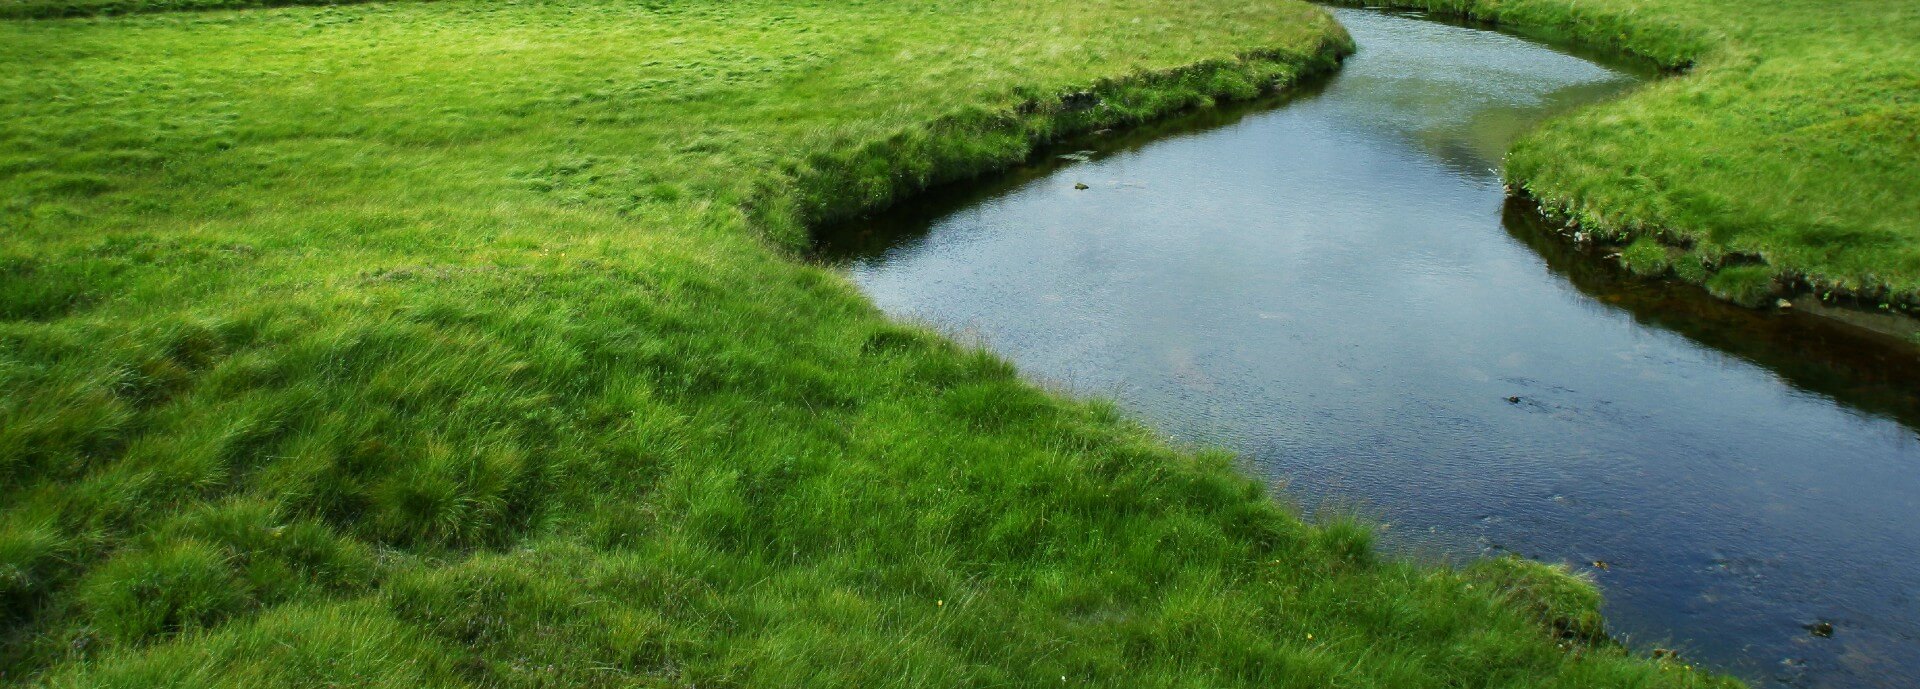 Photograph of a river surrounded by green grass and mountains